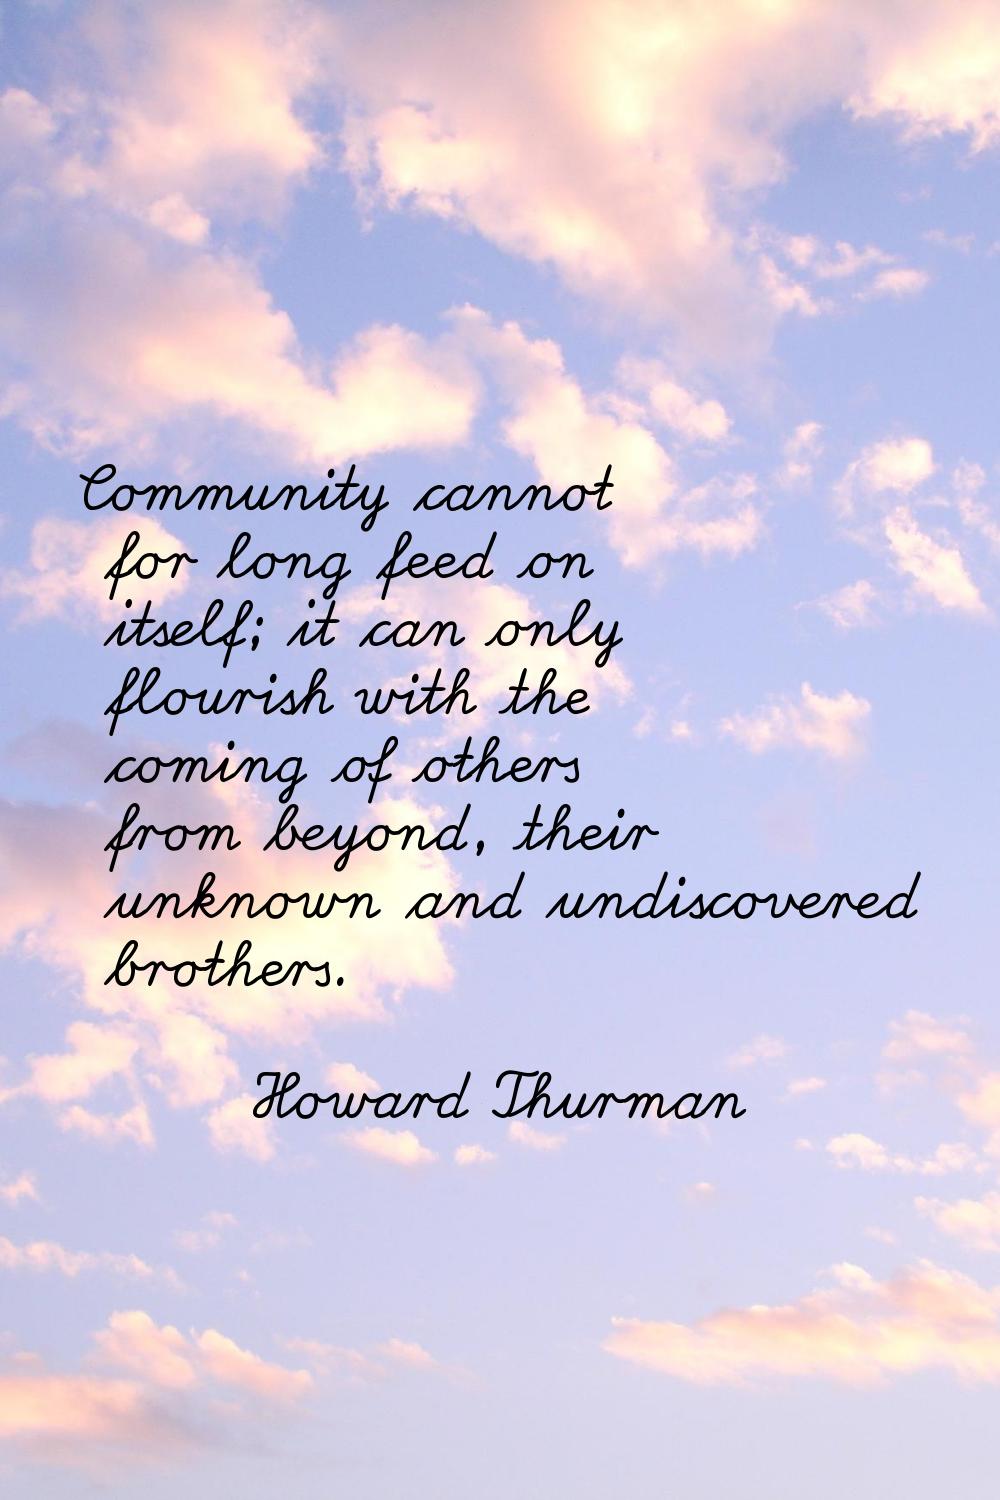 Community cannot for long feed on itself; it can only flourish with the coming of others from beyon